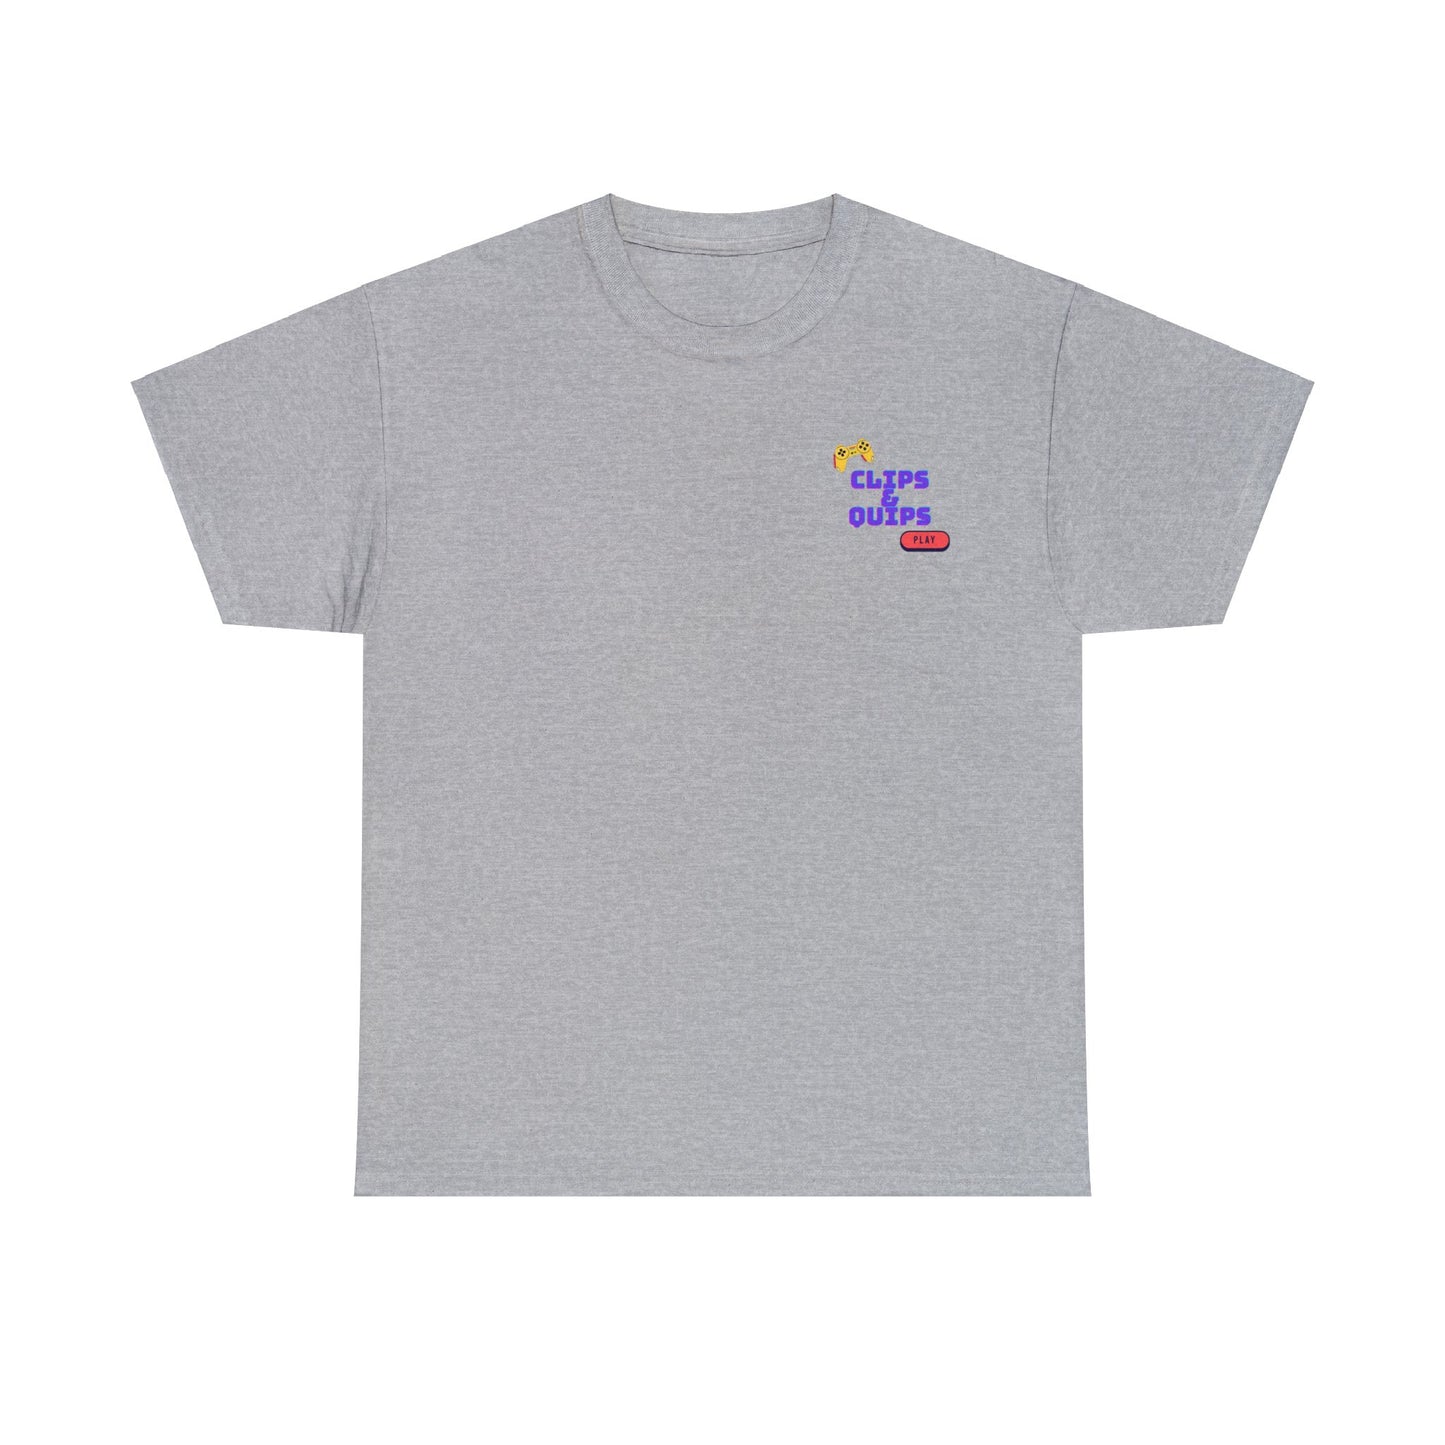 Classic Heavy Cotton Tee Get Clipped design with CAQ Classic Logo